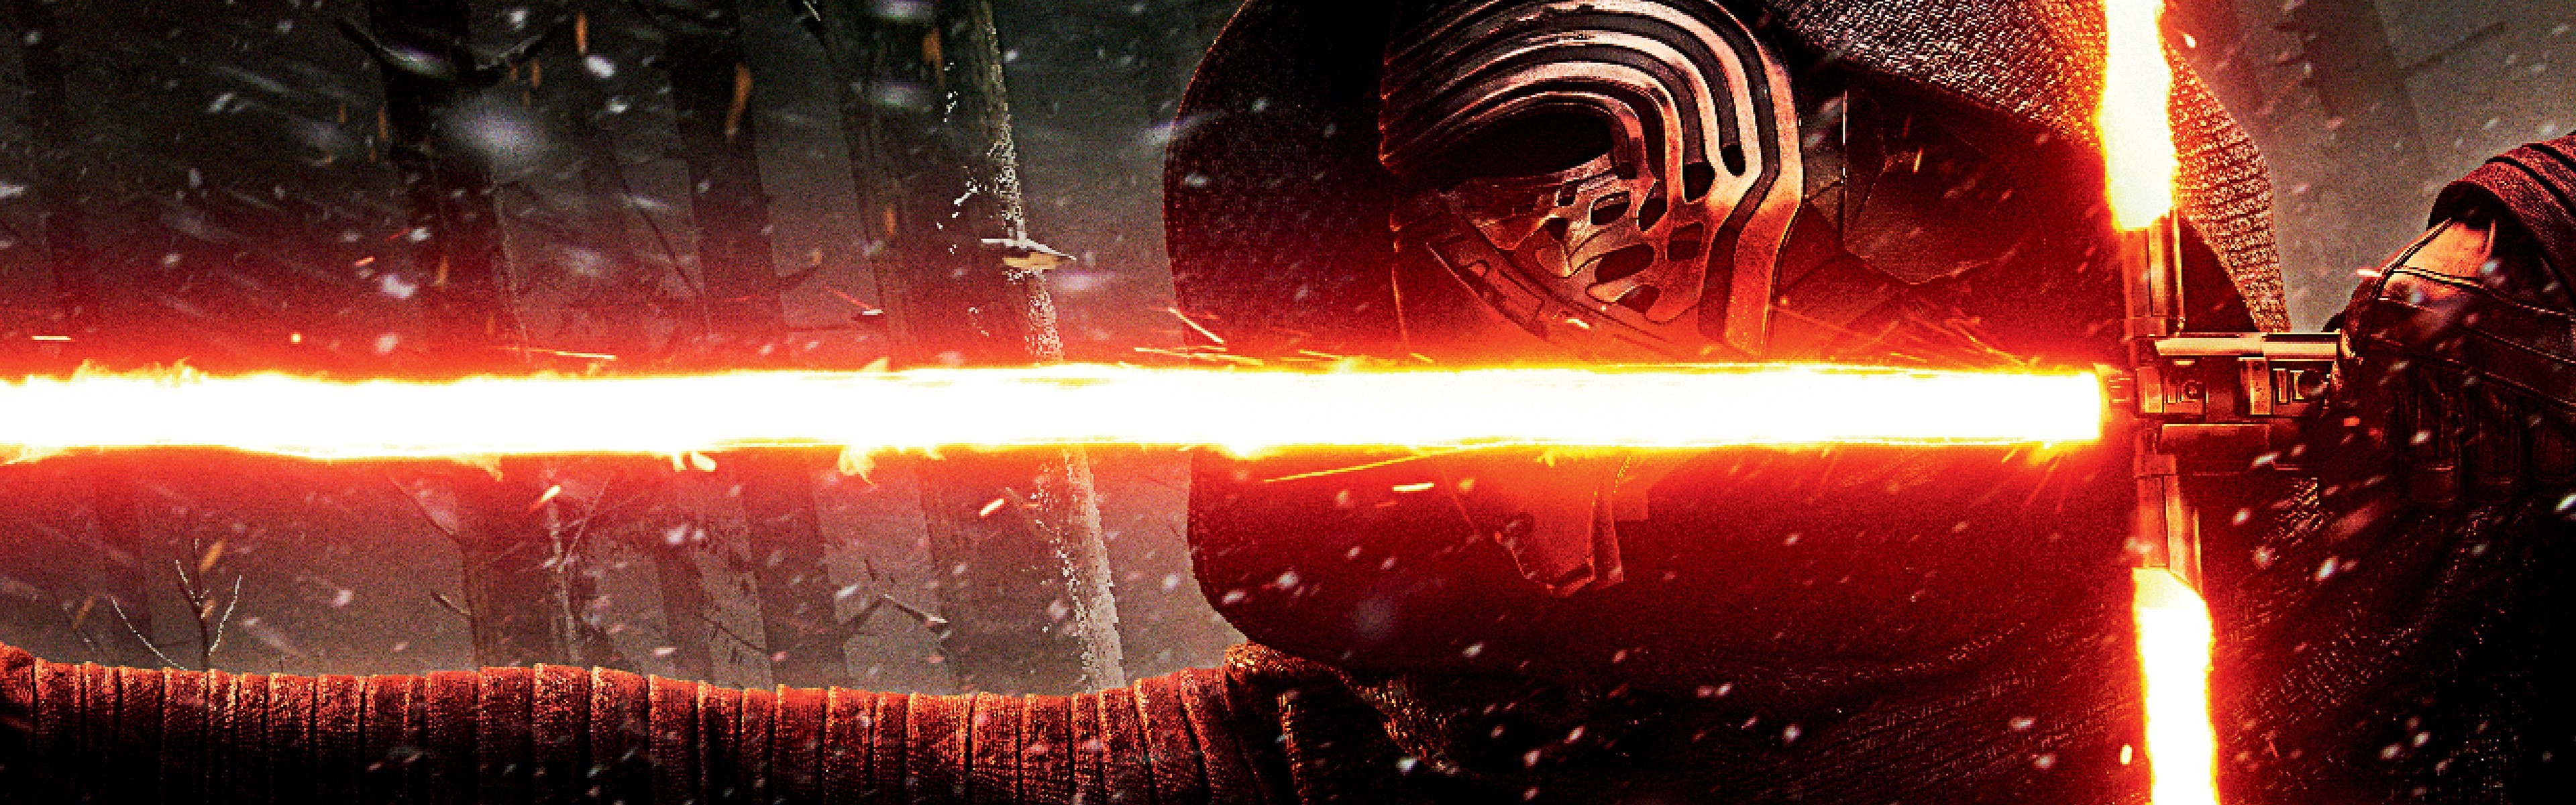 Kylo Ren, Lightsaber, Star Wars: The Force Awakens, Movies Wallpapers HD /  Desktop and Mobile Backgrounds